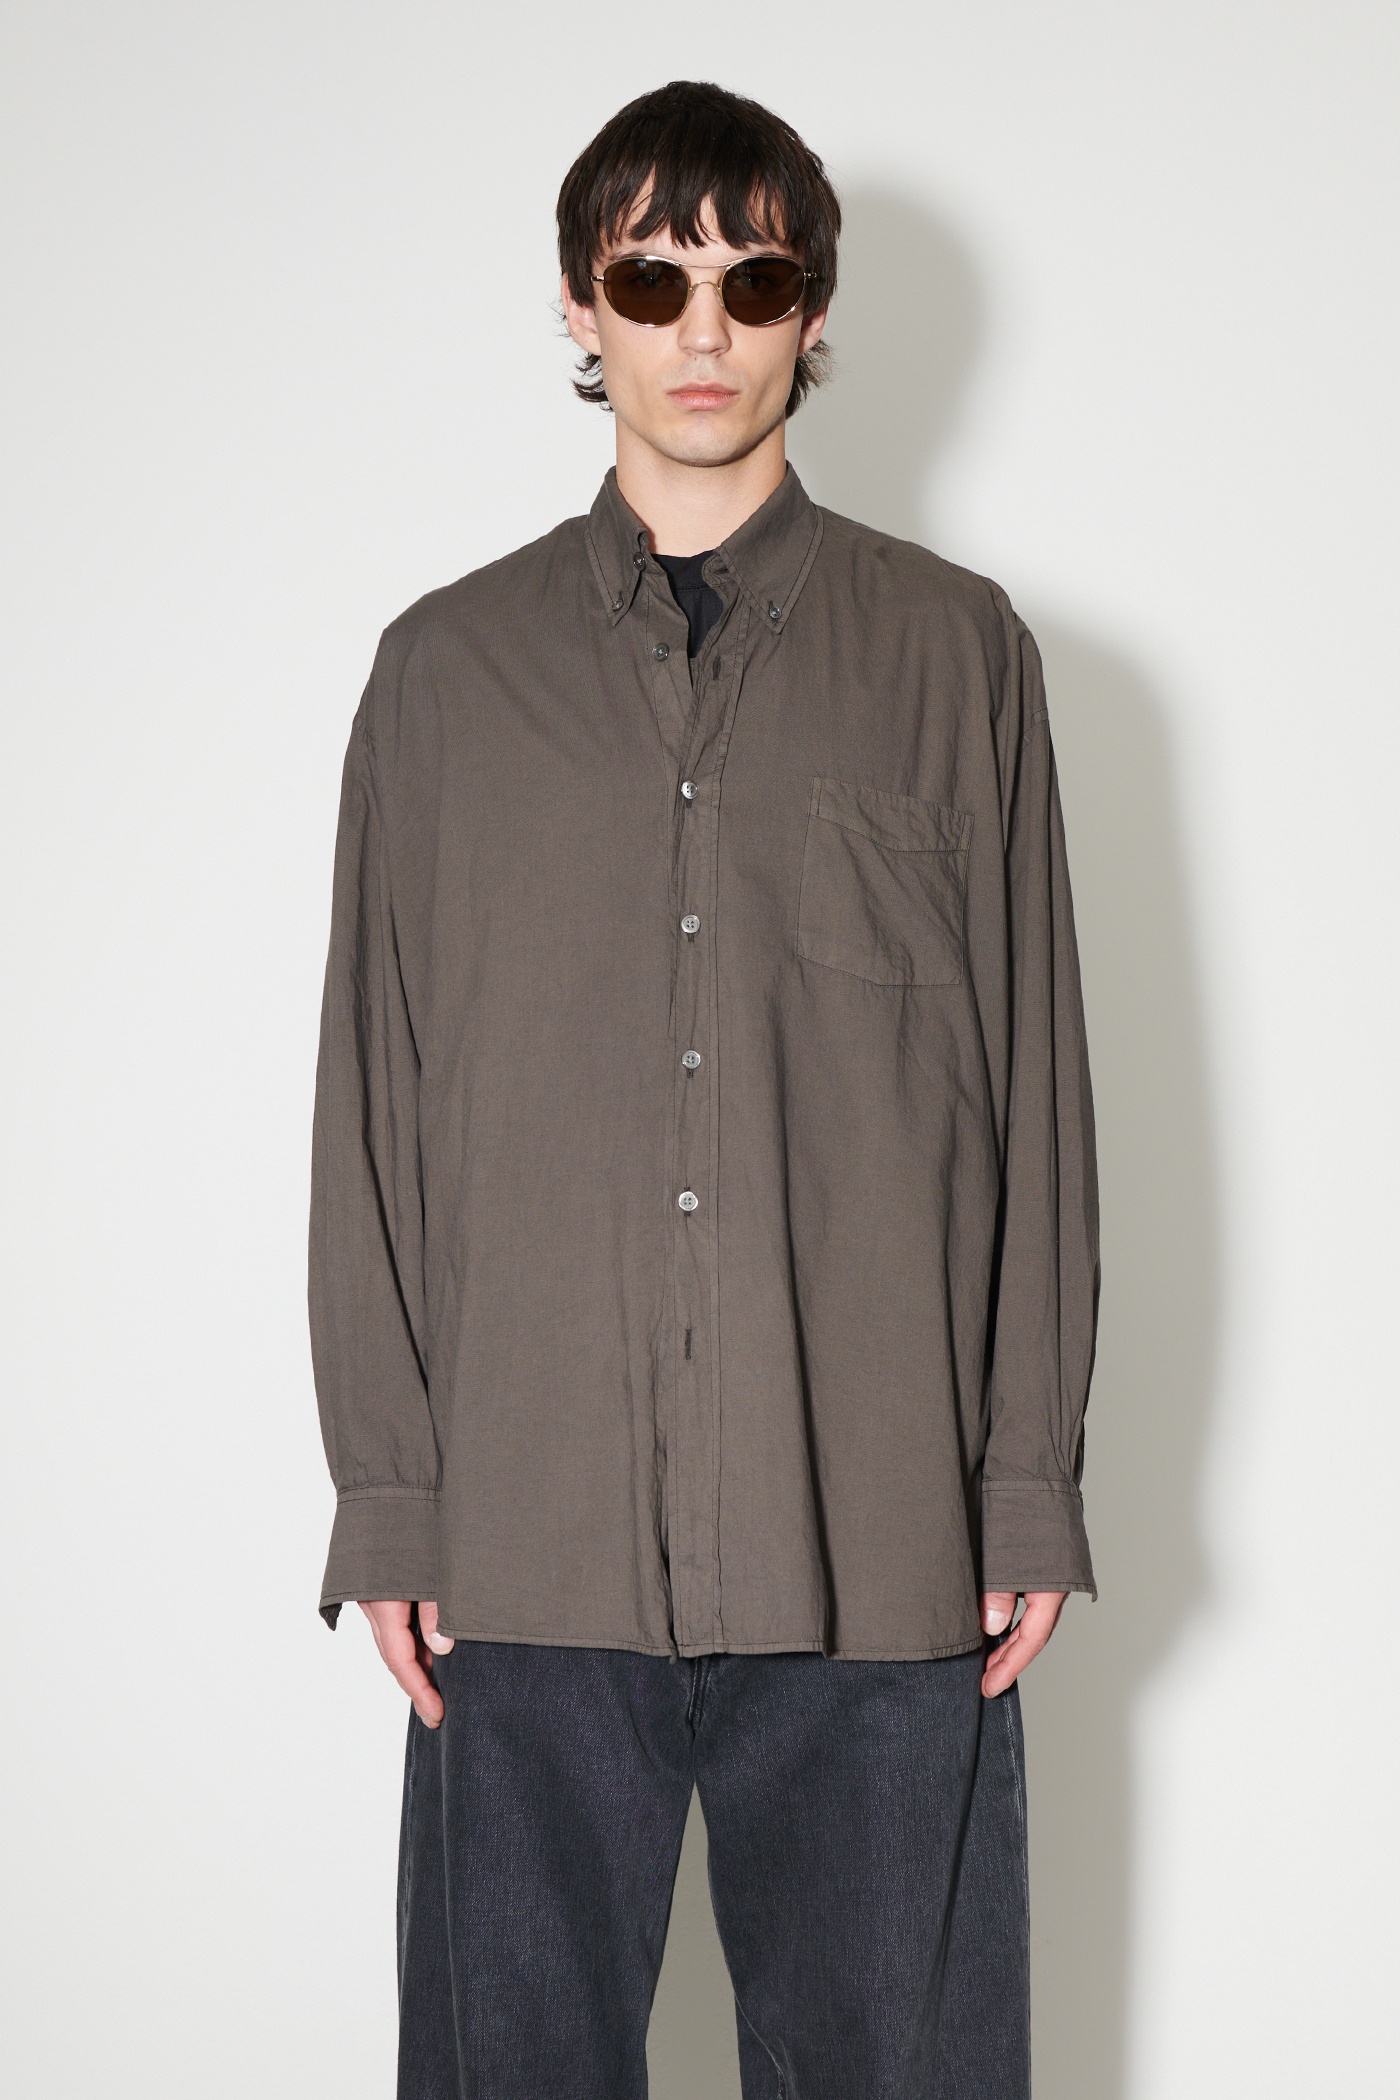 Borrowed BD Shirt Faded Brown Cotton Voile - 6